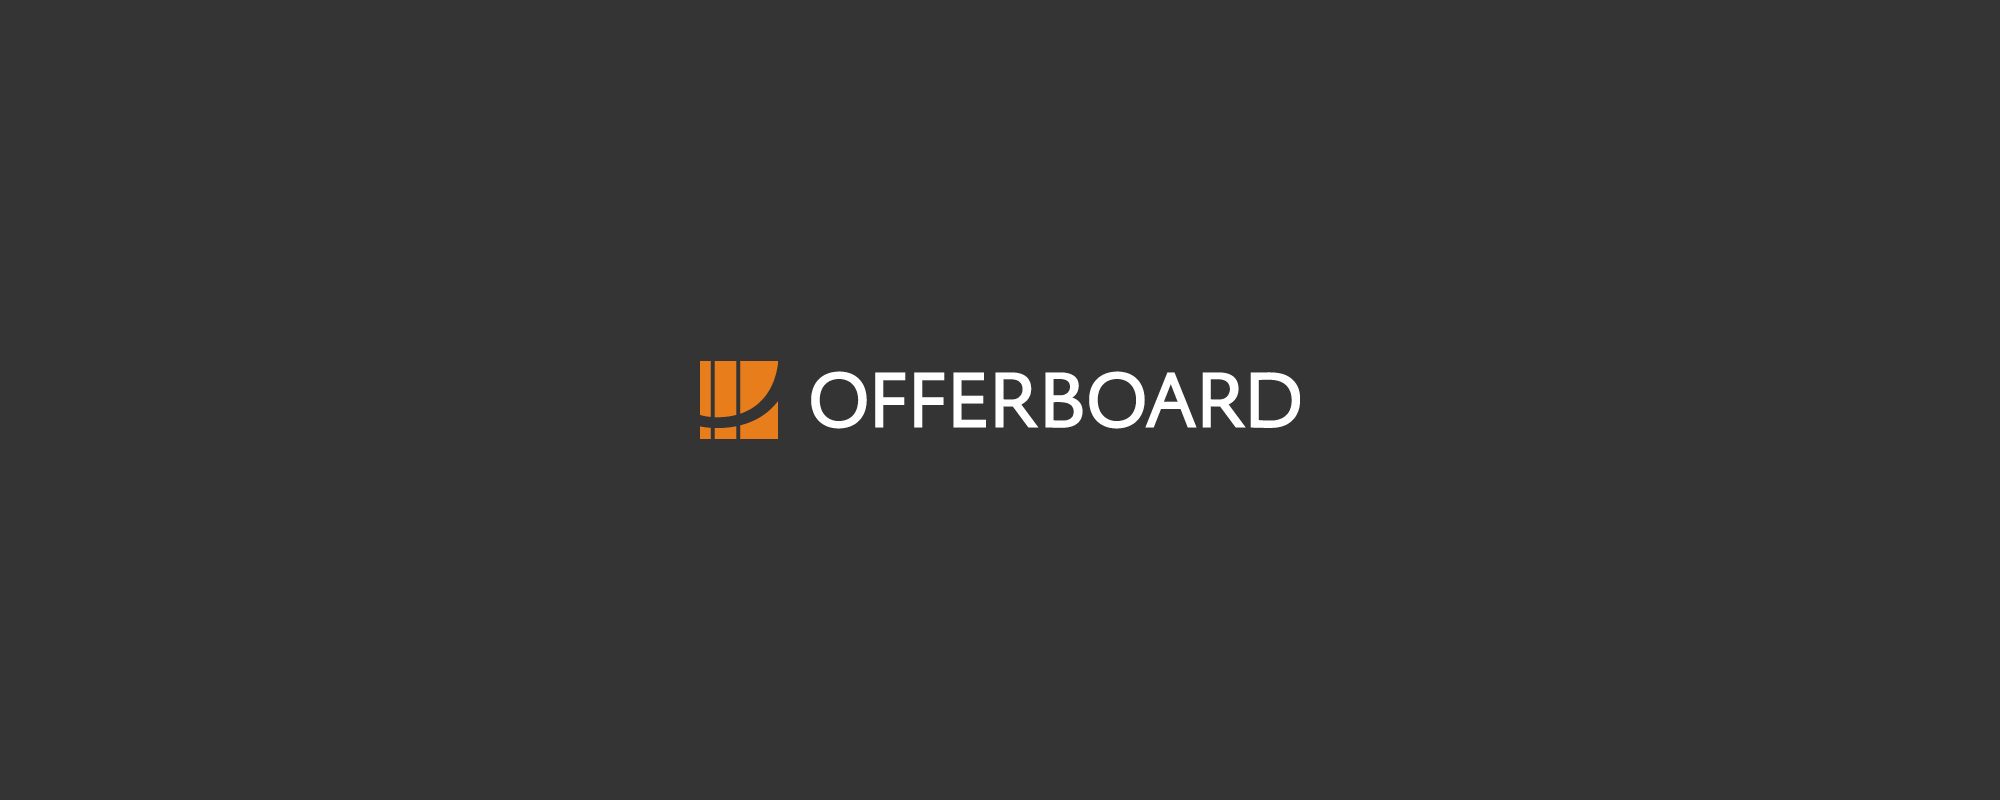 Offerboard Cover Image.jpg